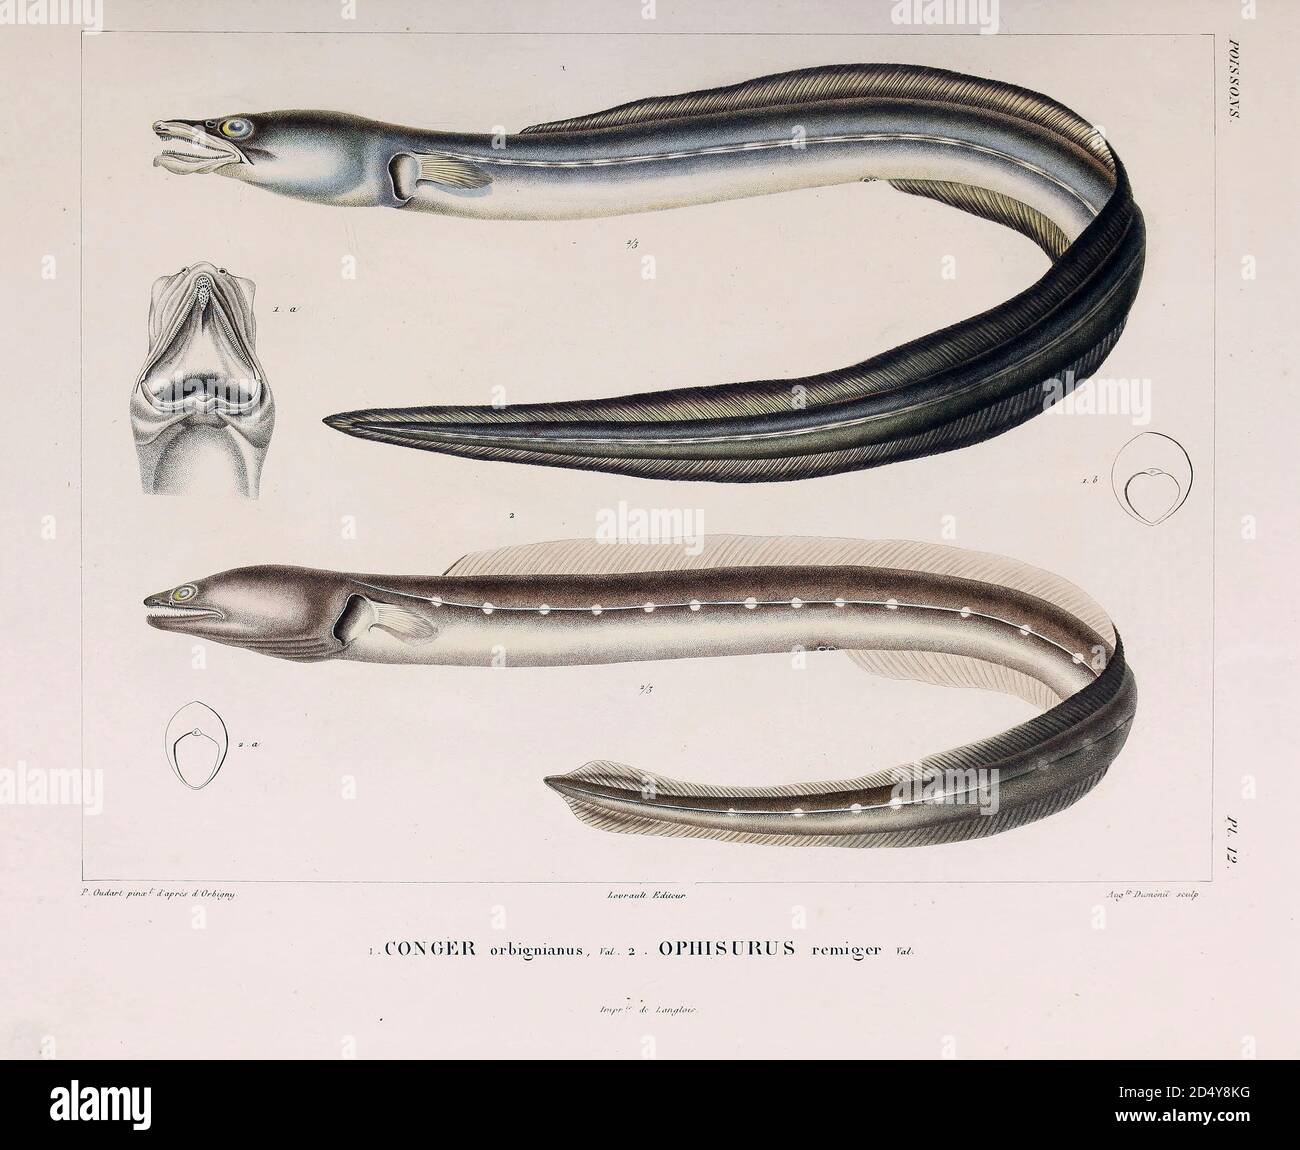 Argentine conger (Conger orbignianus) is a conger of the family Congridae. (Top) and Punctuated snake-eel (Ophichthus remiger, also known as the Common snake eel hand coloured sketch From the book 'Voyage dans l'Amérique Méridionale' [Journey to South America: (Brazil, the eastern republic of Uruguay, the Argentine Republic, Patagonia, the republic of Chile, the republic of Bolivia, the republic of Peru), executed during the years 1826 - 1833] Volume 5 Part 1 By: Orbigny, Alcide Dessalines d', d'Orbigny, 1802-1857; Montagne, Jean François Camille, 1784-1866; Martius, Karl Friedrich Philipp vo Stock Photo